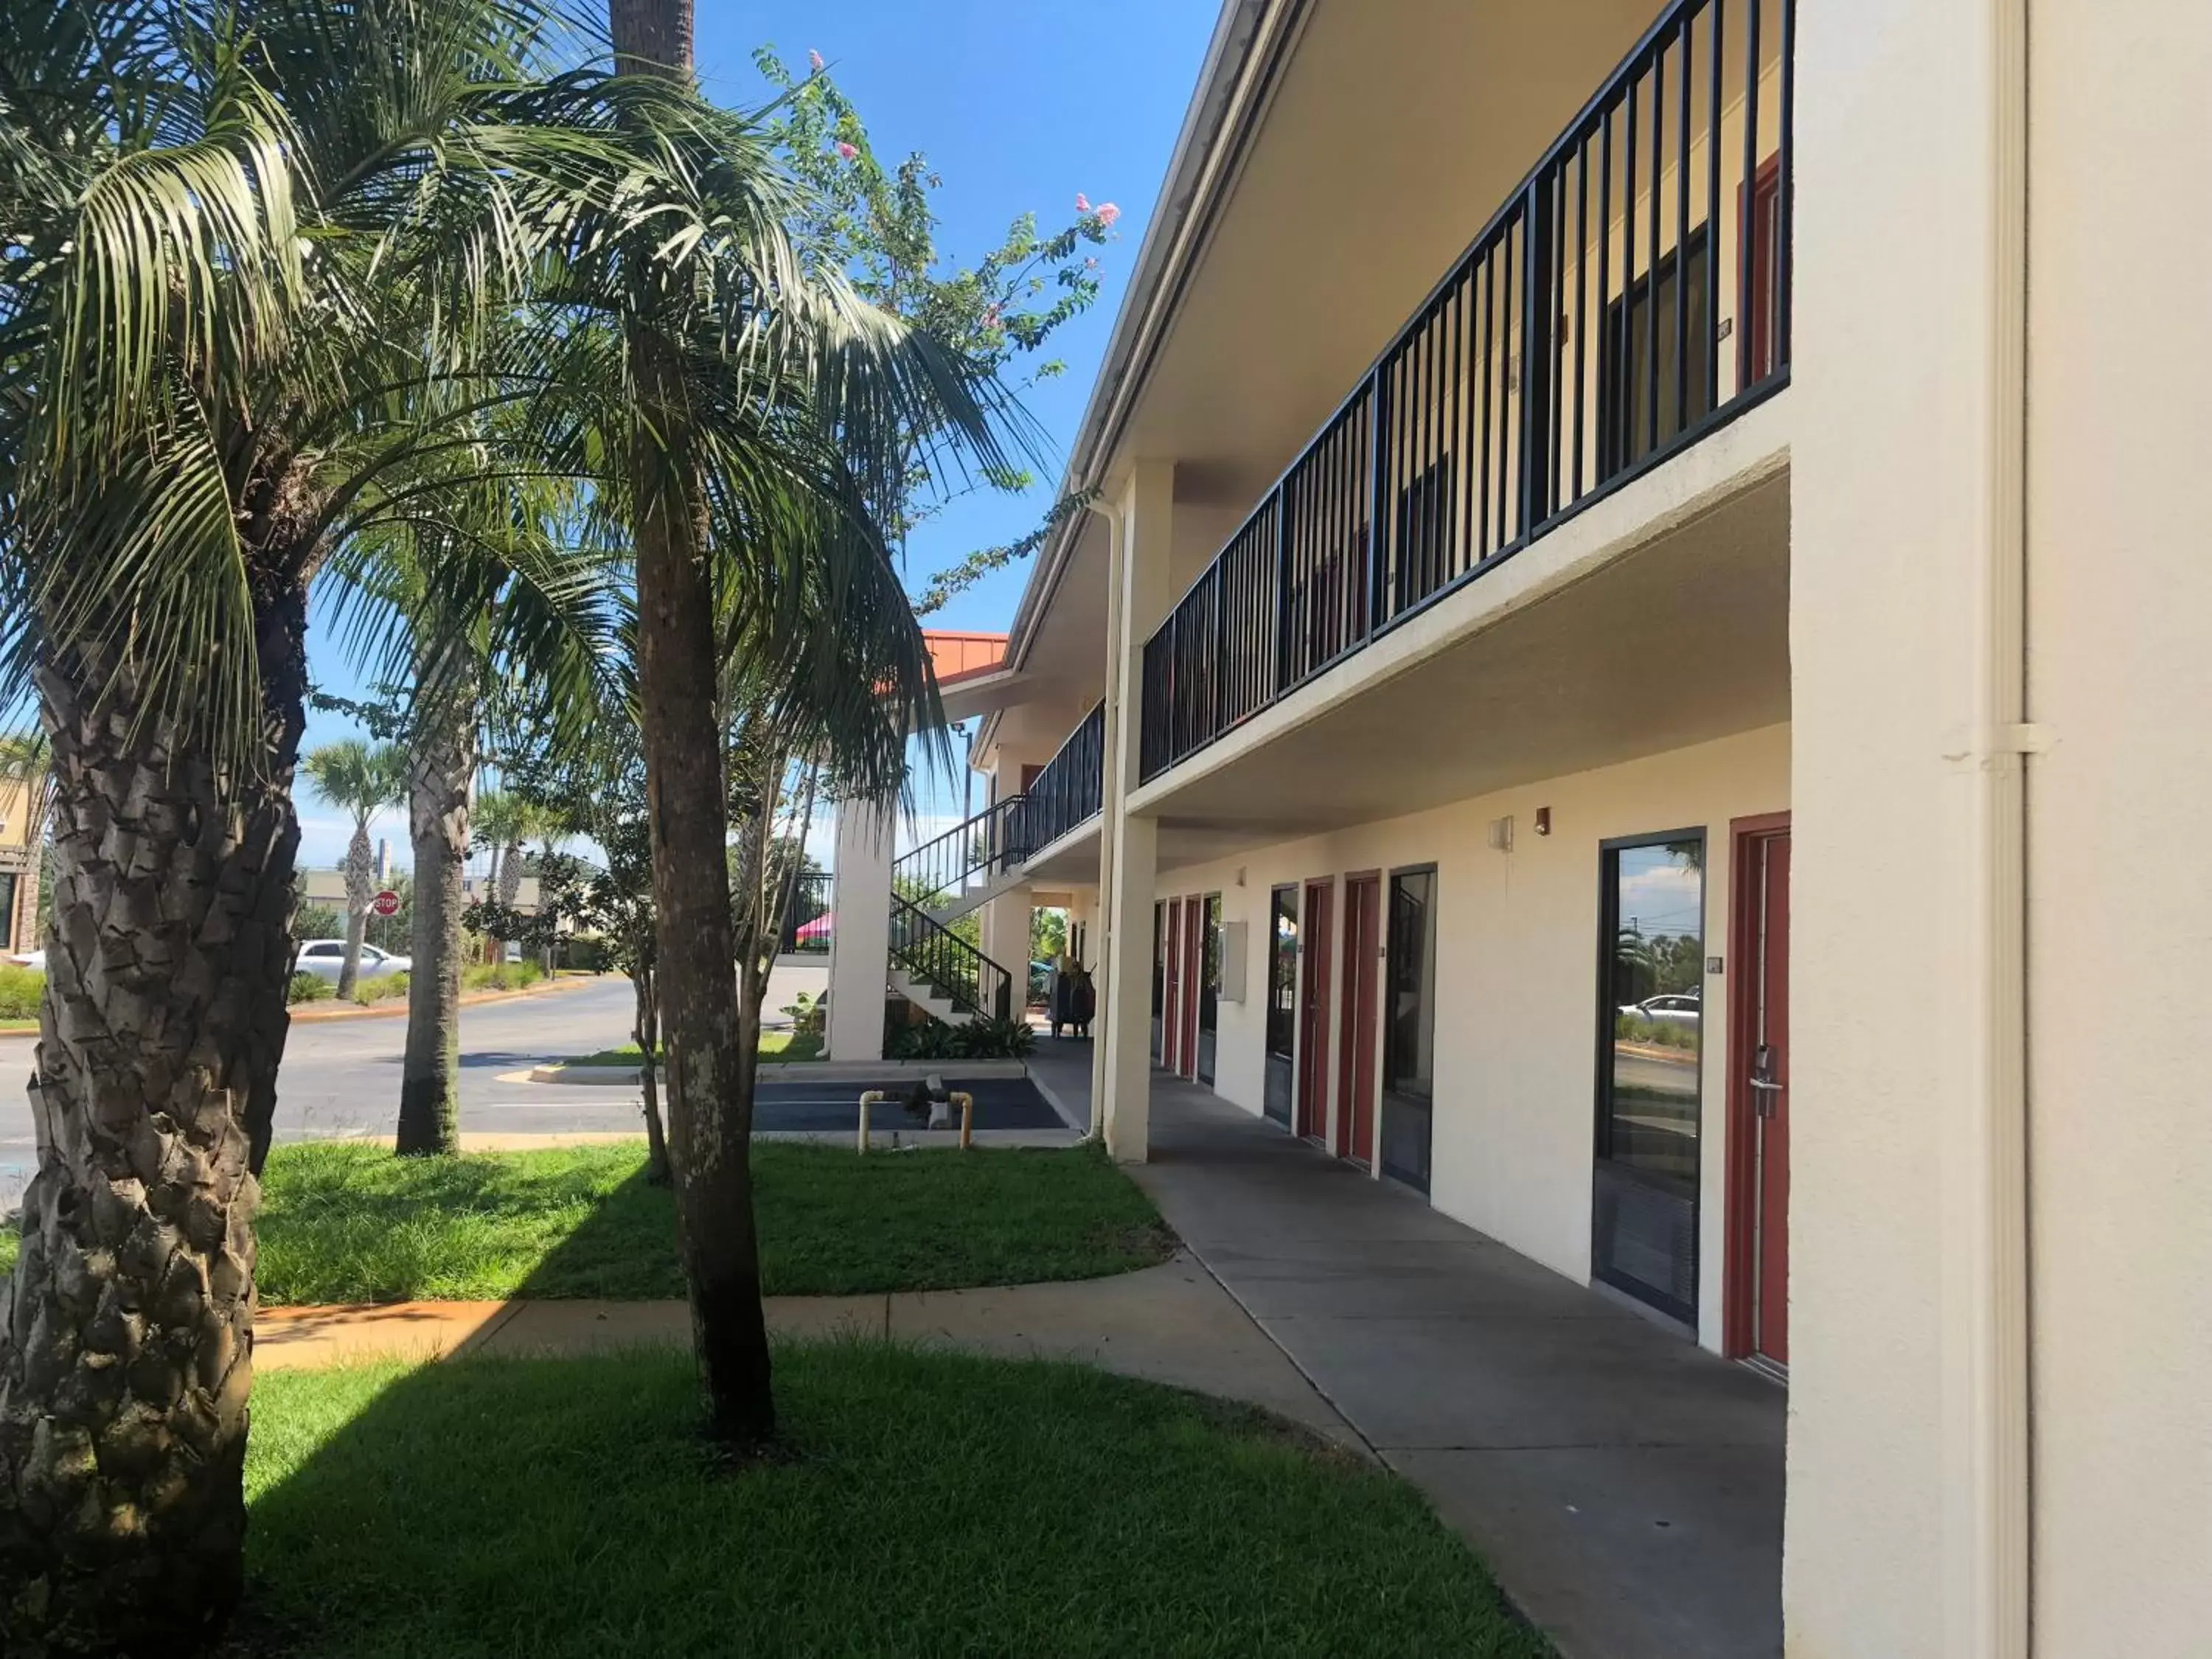 Balcony/Terrace, Property Building in Days Inn & Suites by Wyndham Navarre Conference Center